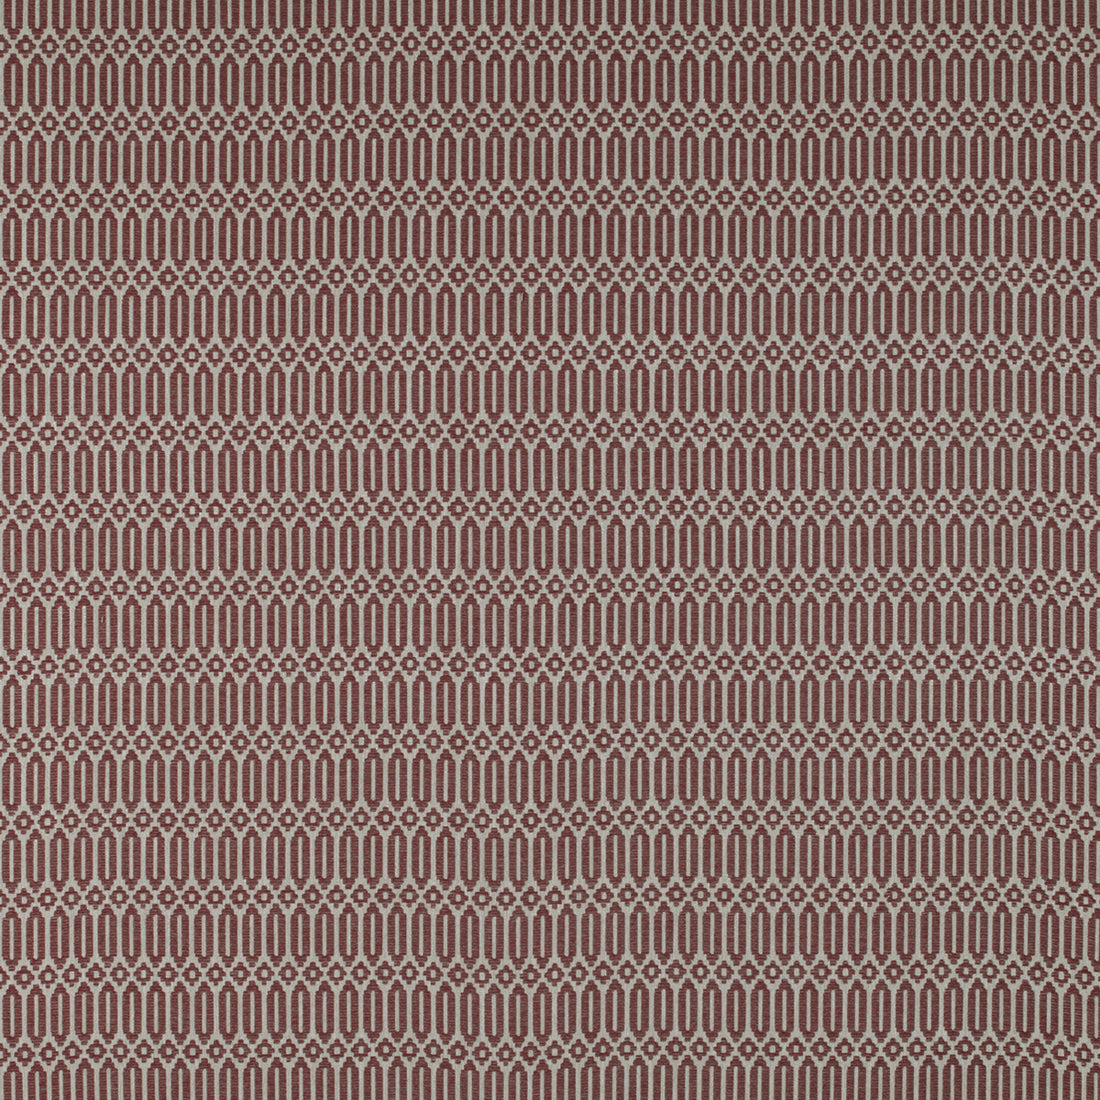 Varese fabric in burdeos color - pattern GDT5321.005.0 - by Gaston y Daniela in the Tierras collection